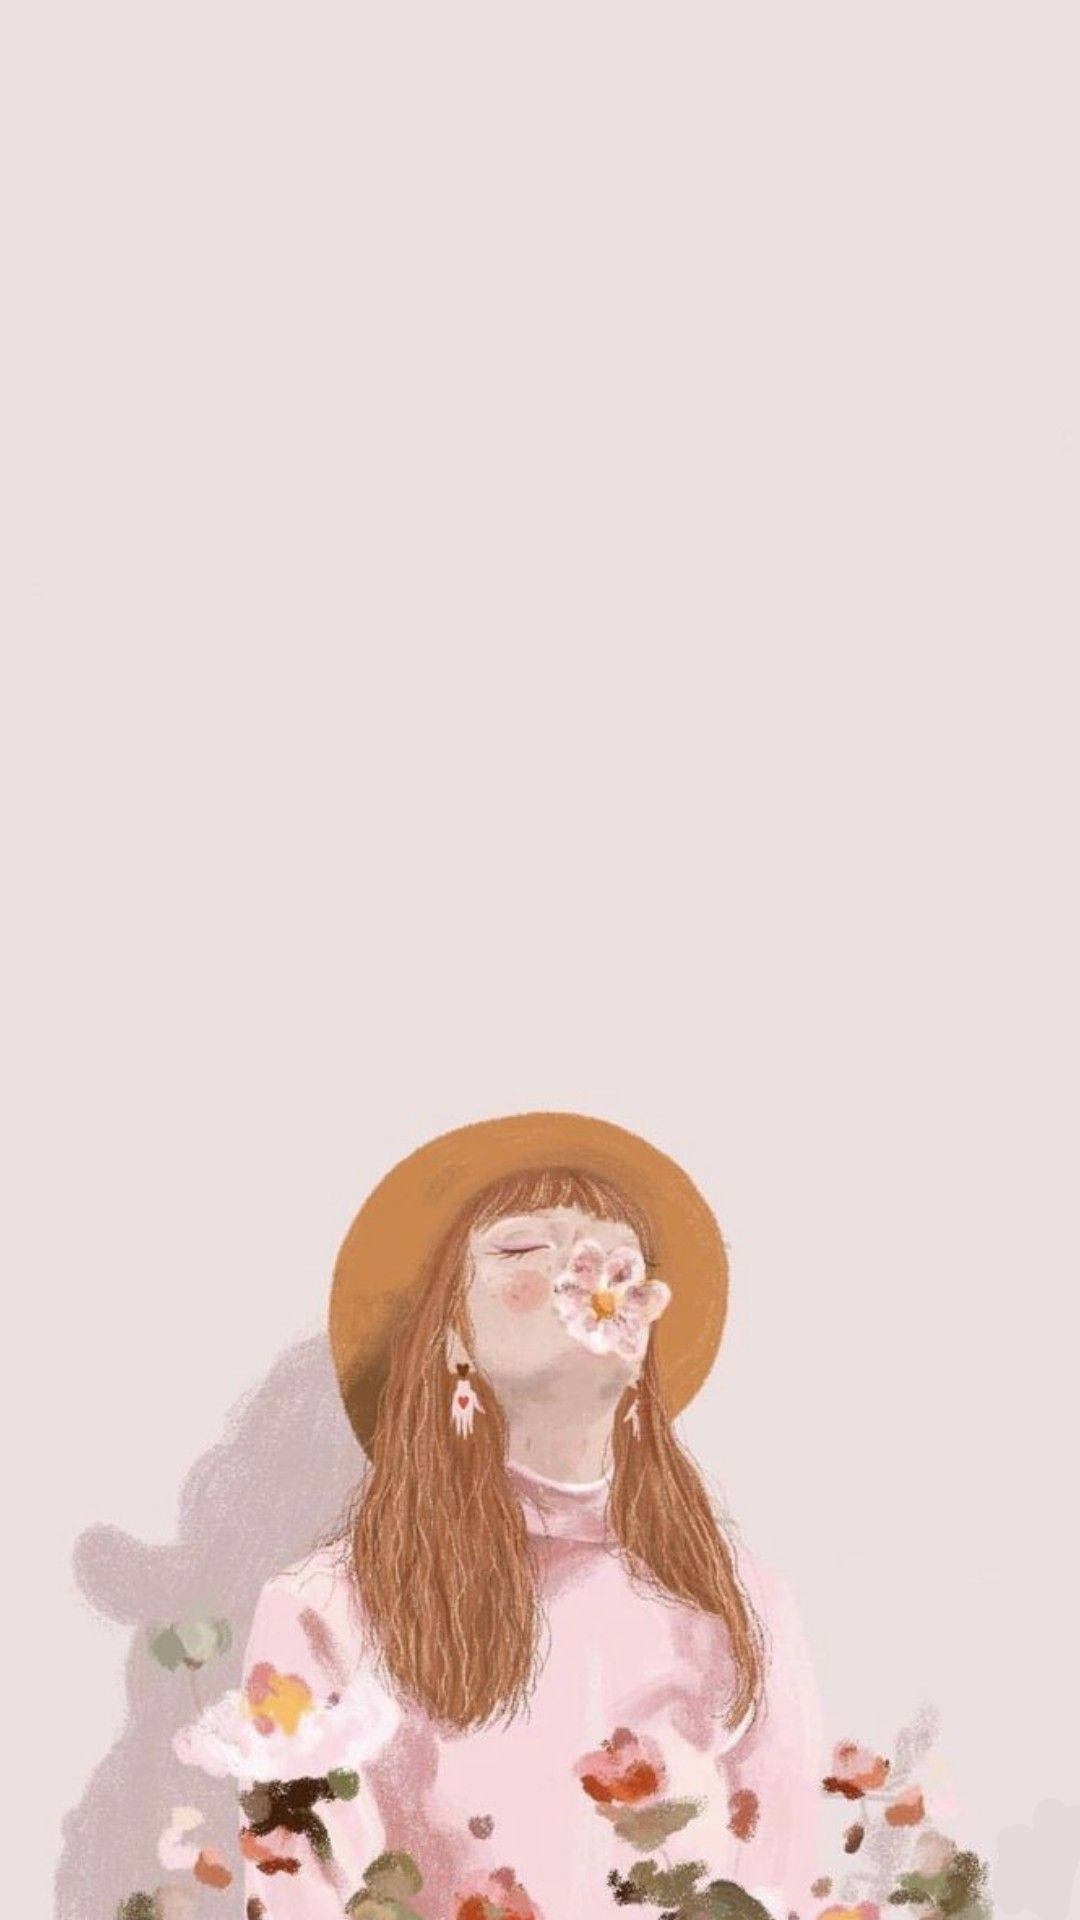 Captivating Pink Aesthetic Girl Painting Background